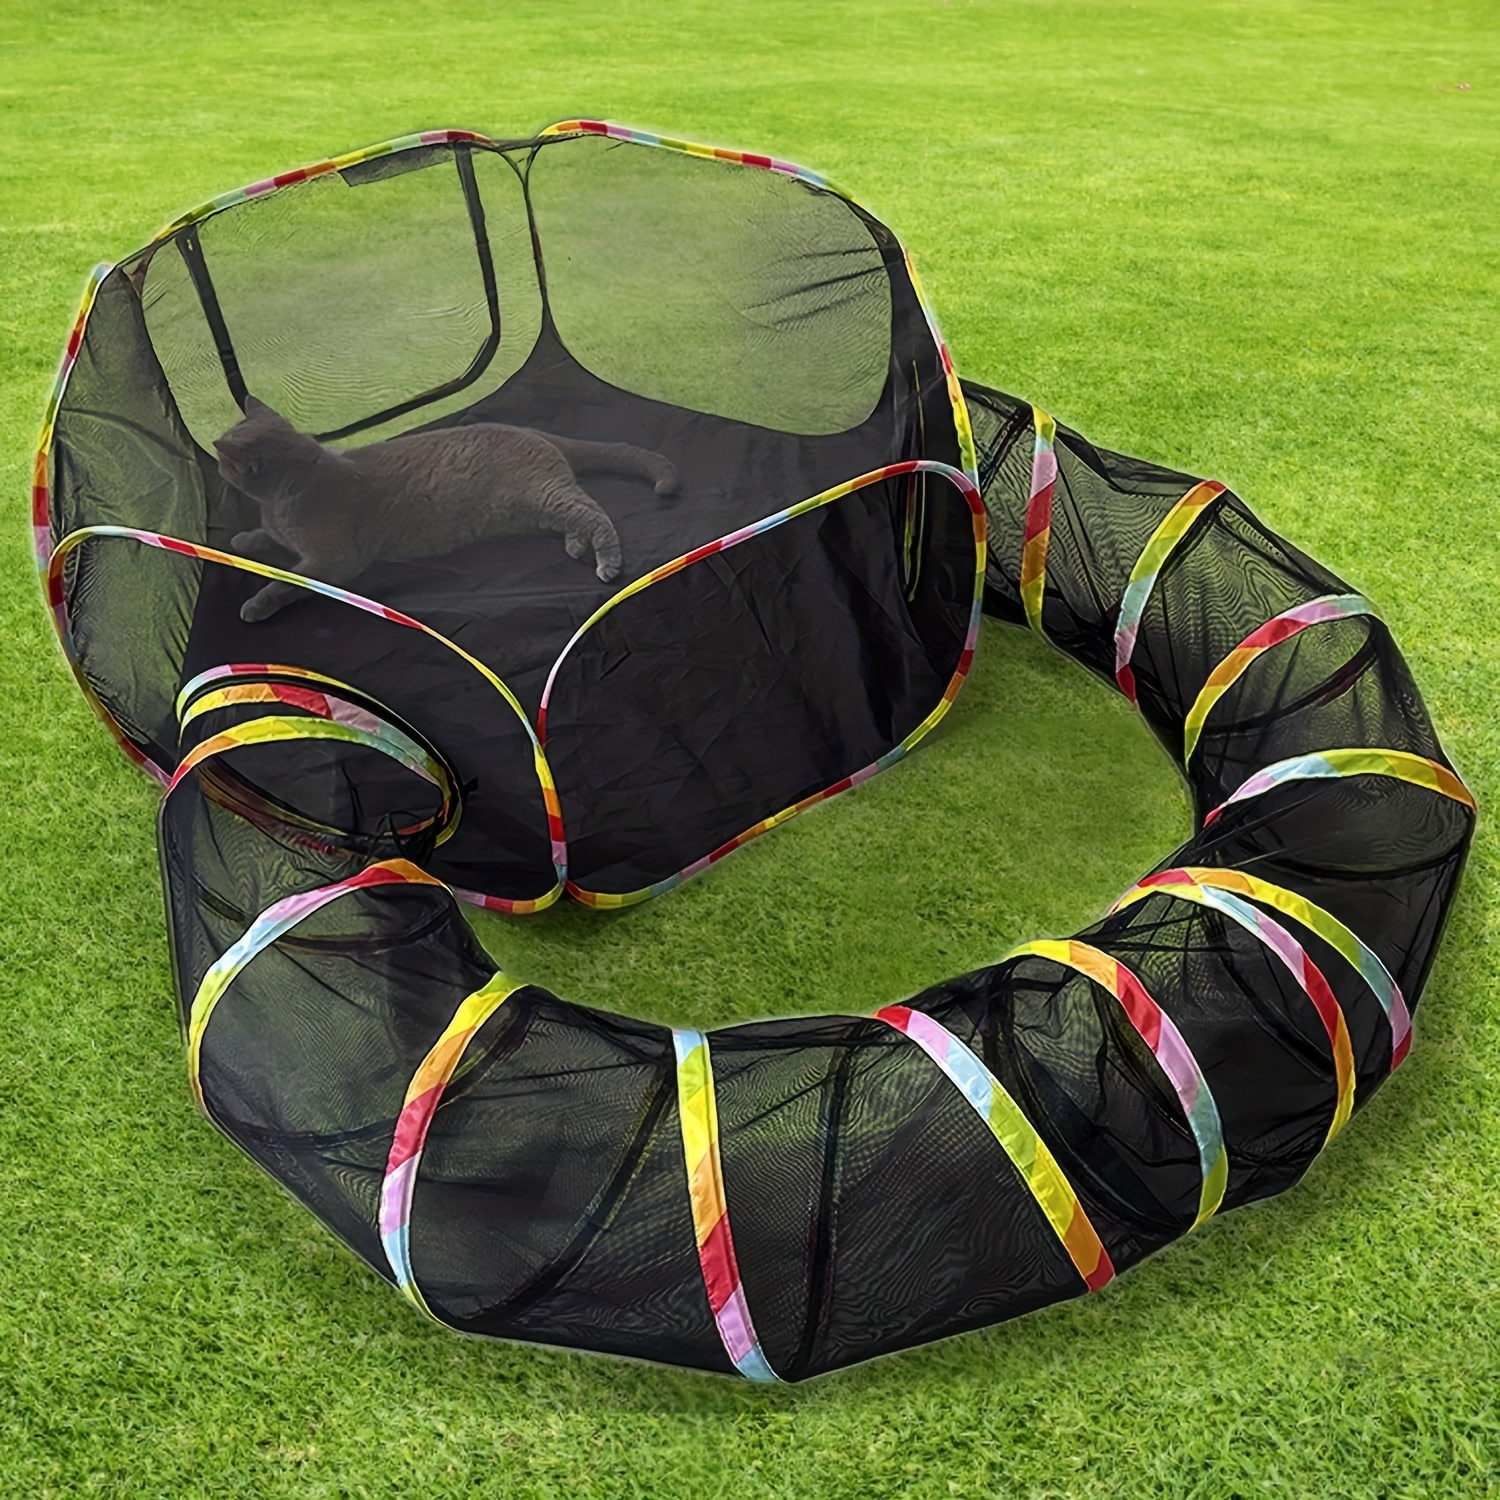 

Outdoor Rainbow Cat Enclosures Playground - Portable Cat Tent With 3-way Tunnel And 2 Cubes, Outside House For Indoor Cats, Kitty, And Small Animals, Includes Storage Bag